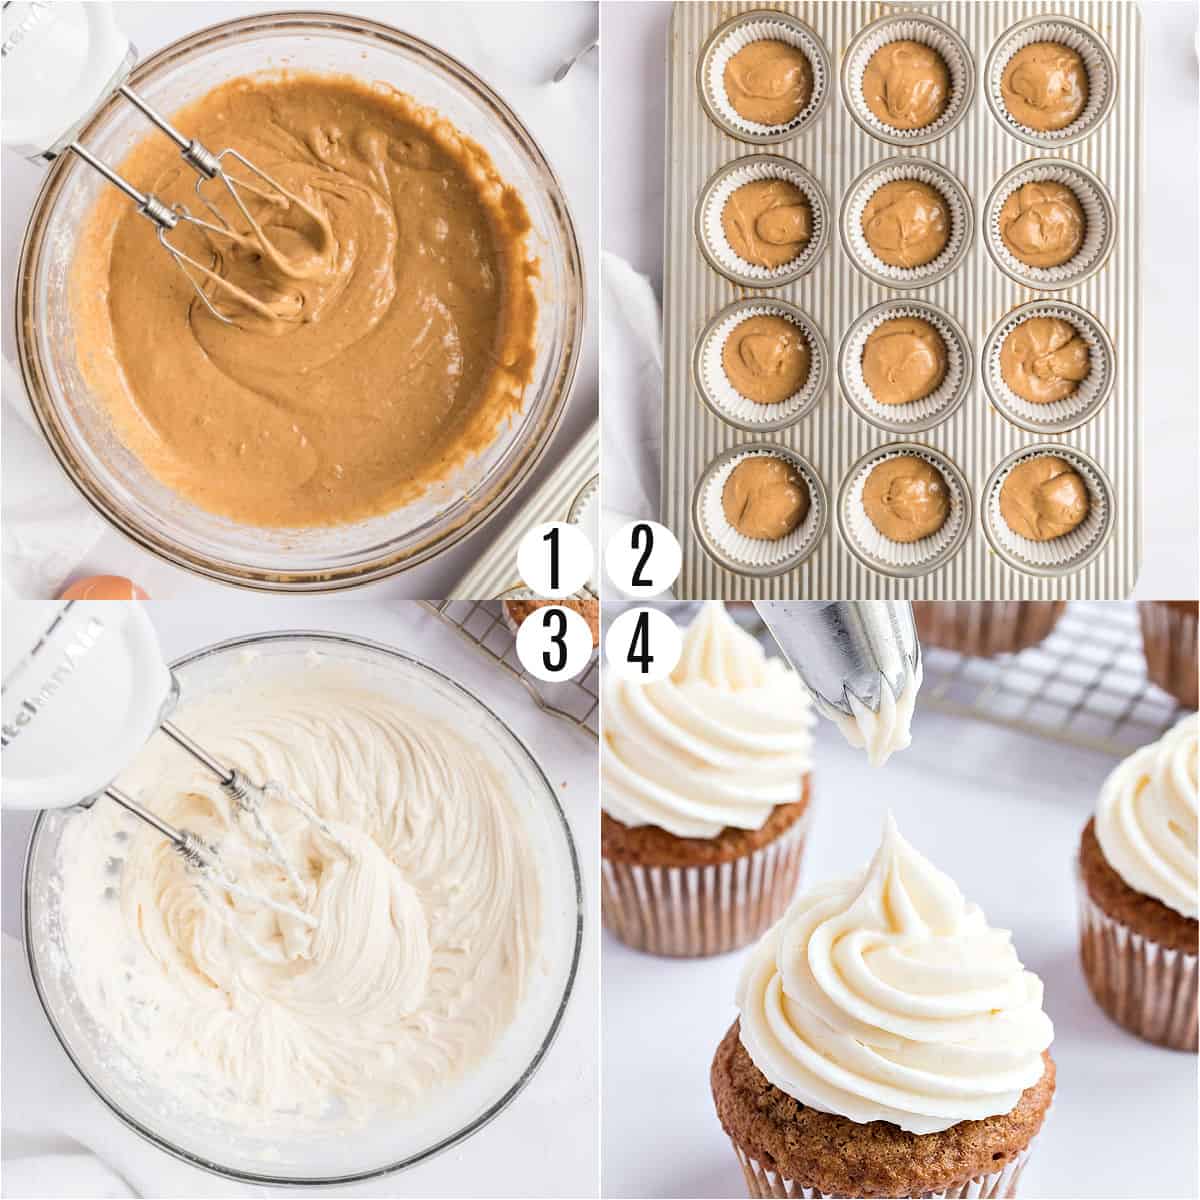 Step by step photos showing how to make gingerbread cupcakes.